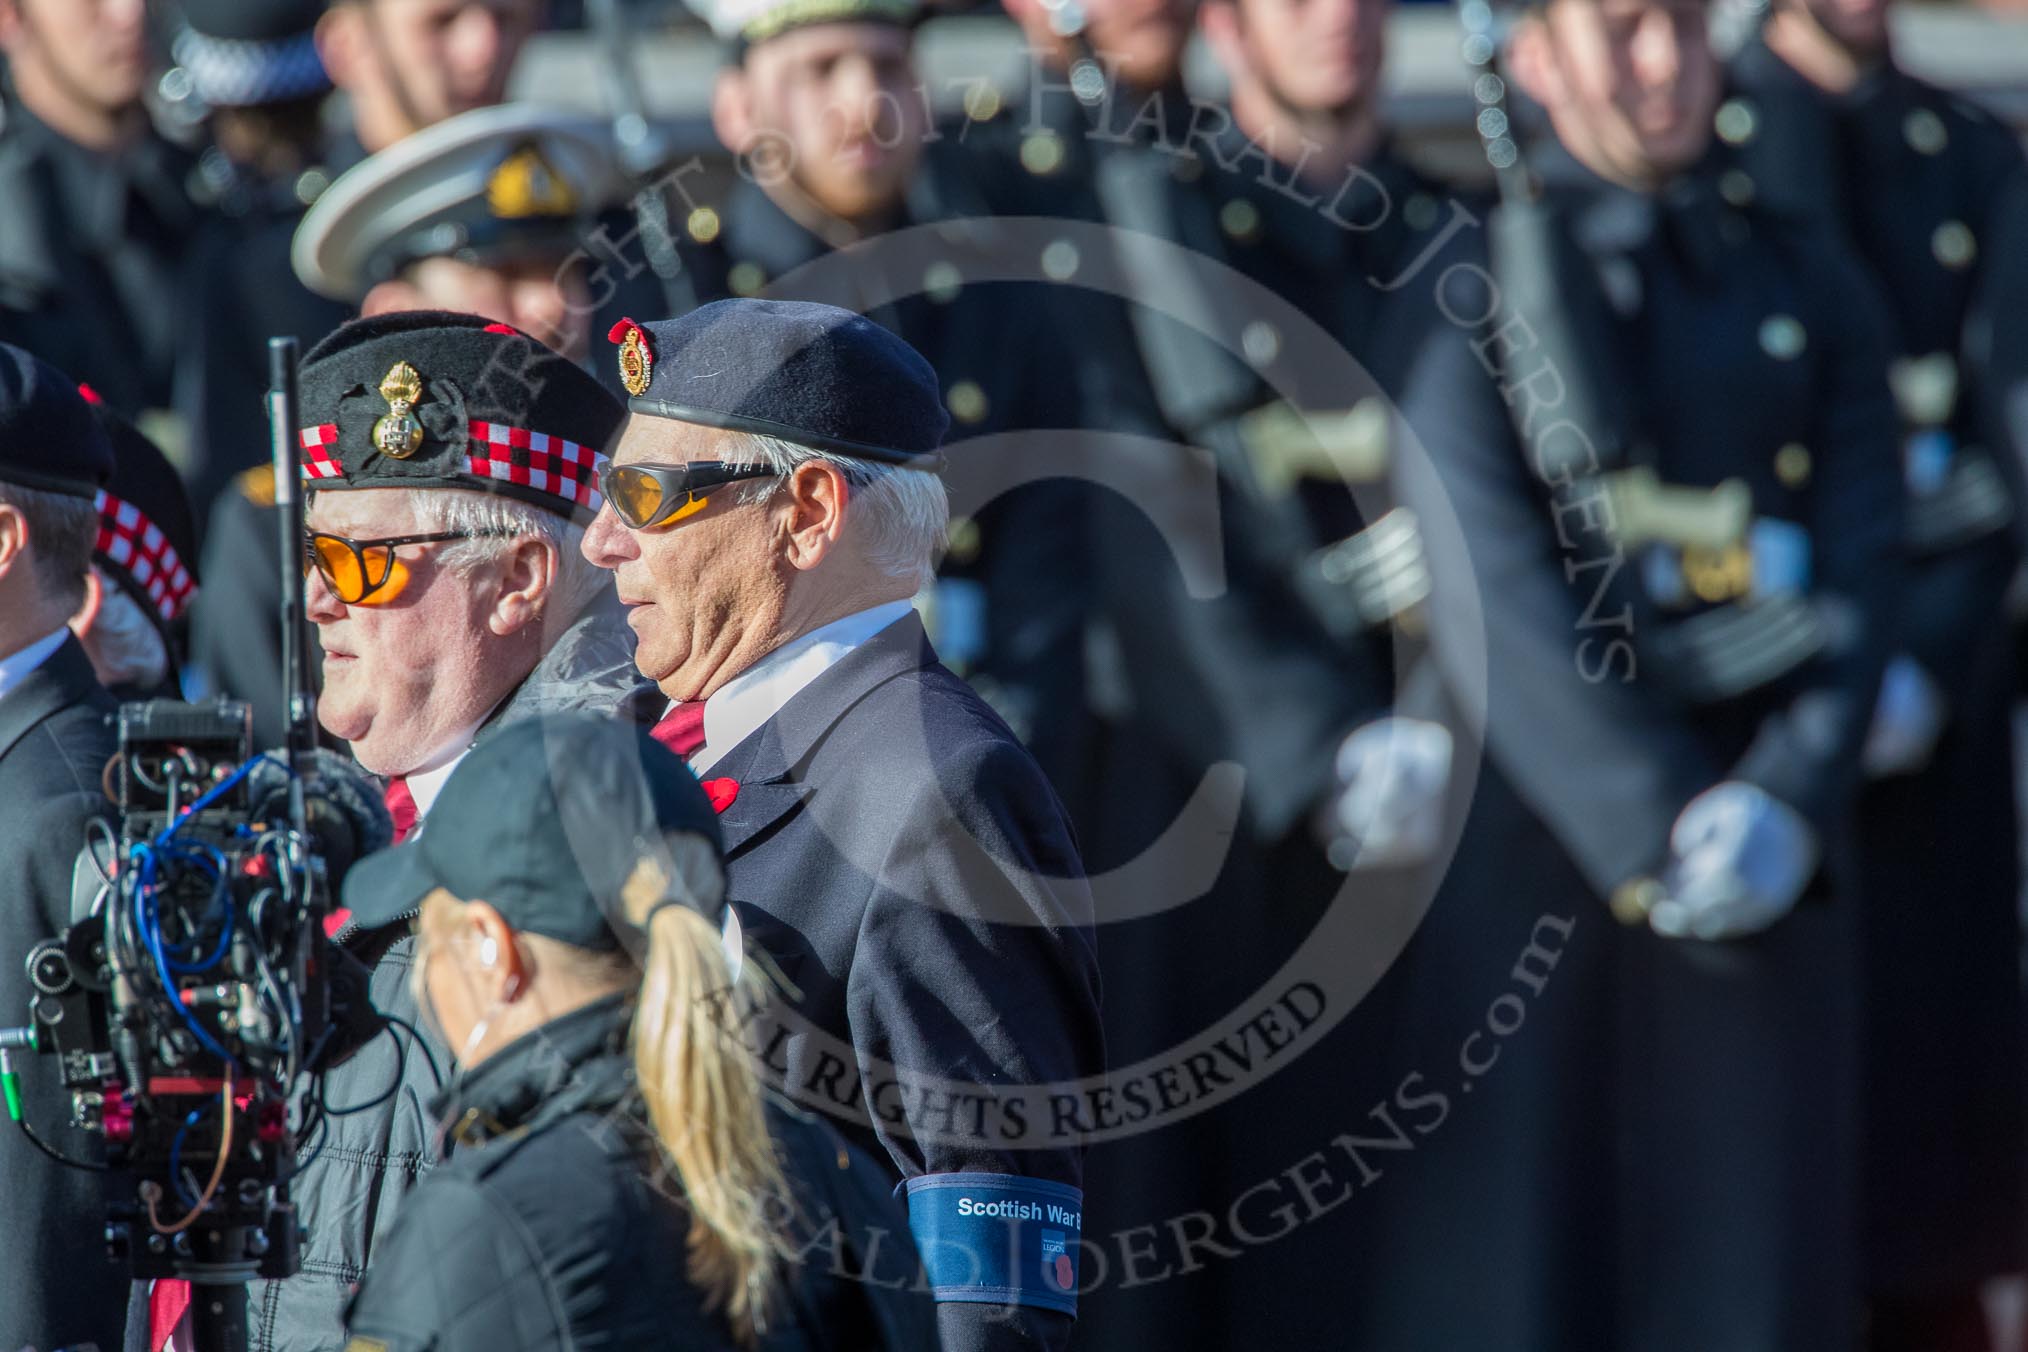 Scottish War Blinded (Group AA8, 21 members) during the Royal British Legion March Past on Remembrance Sunday at the Cenotaph, Whitehall, Westminster, London, 11 November 2018, 11:49.